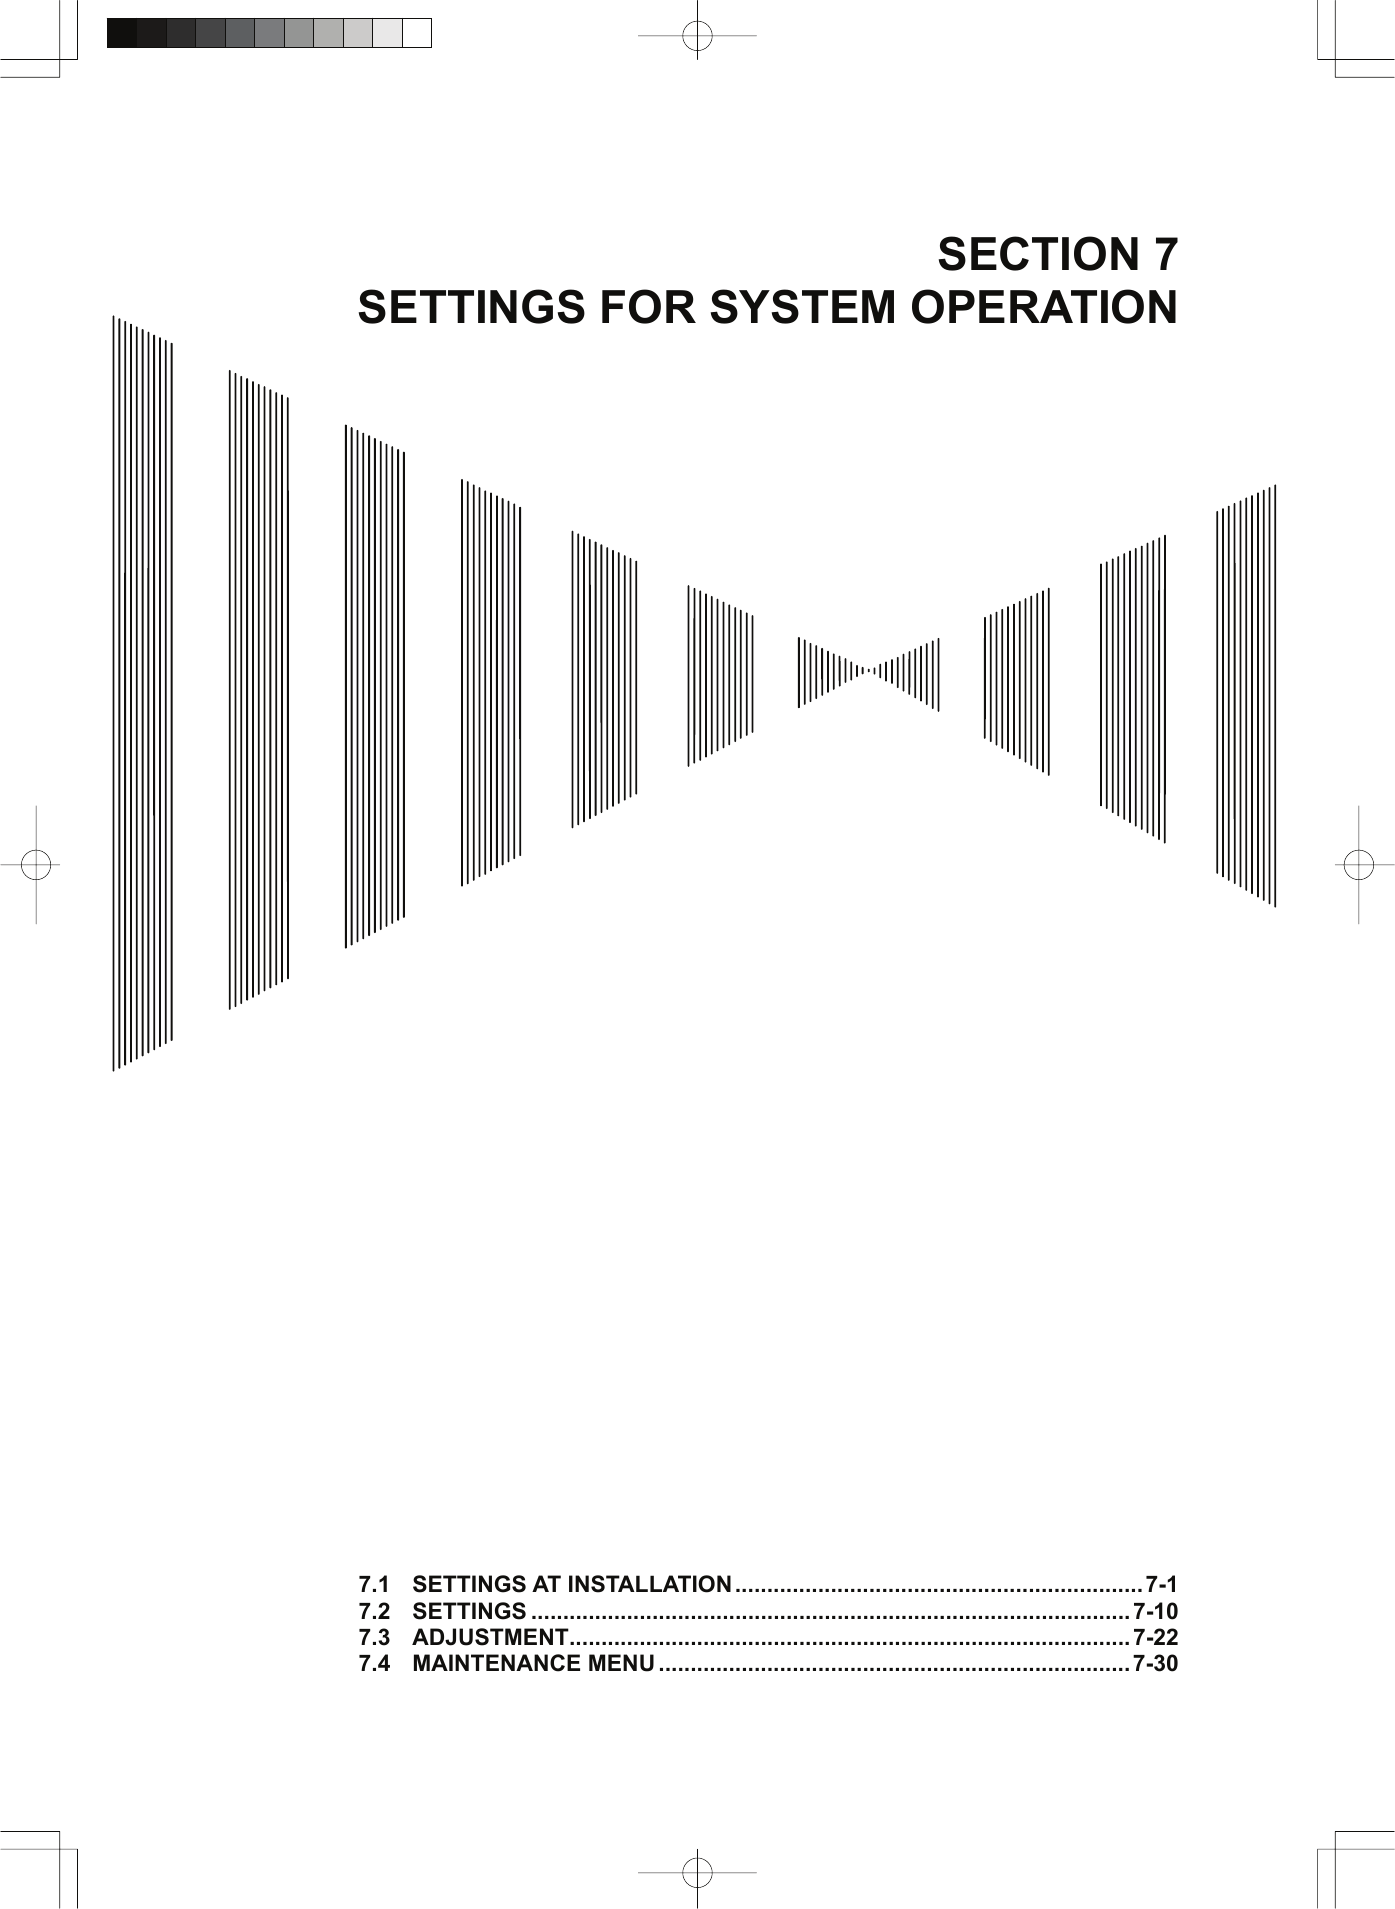  SECTION 7 SETTINGS FOR SYSTEM OPERATION                                              7.1 SETTINGS AT INSTALLATION................................................................7-1 7.2 SETTINGS ..............................................................................................7-10 7.3 ADJUSTMENT........................................................................................7-22 7.4 MAINTENANCE MENU .......................................................................... 7-30 